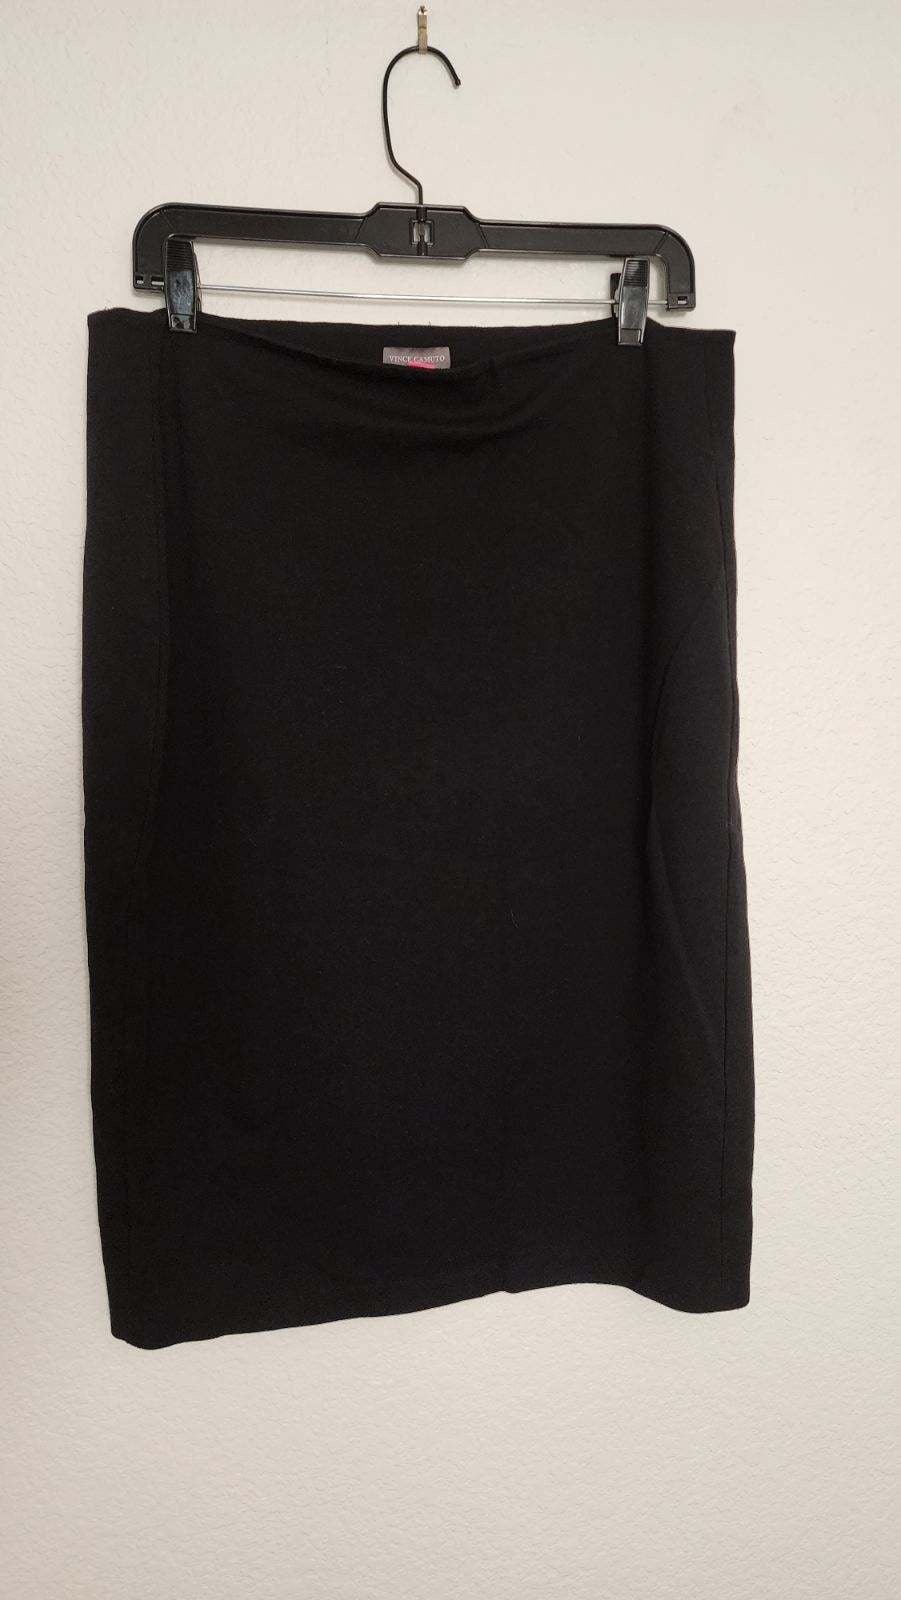 Great Vince Camuto Black Skirt, Size L oOpuJdo2g Buying